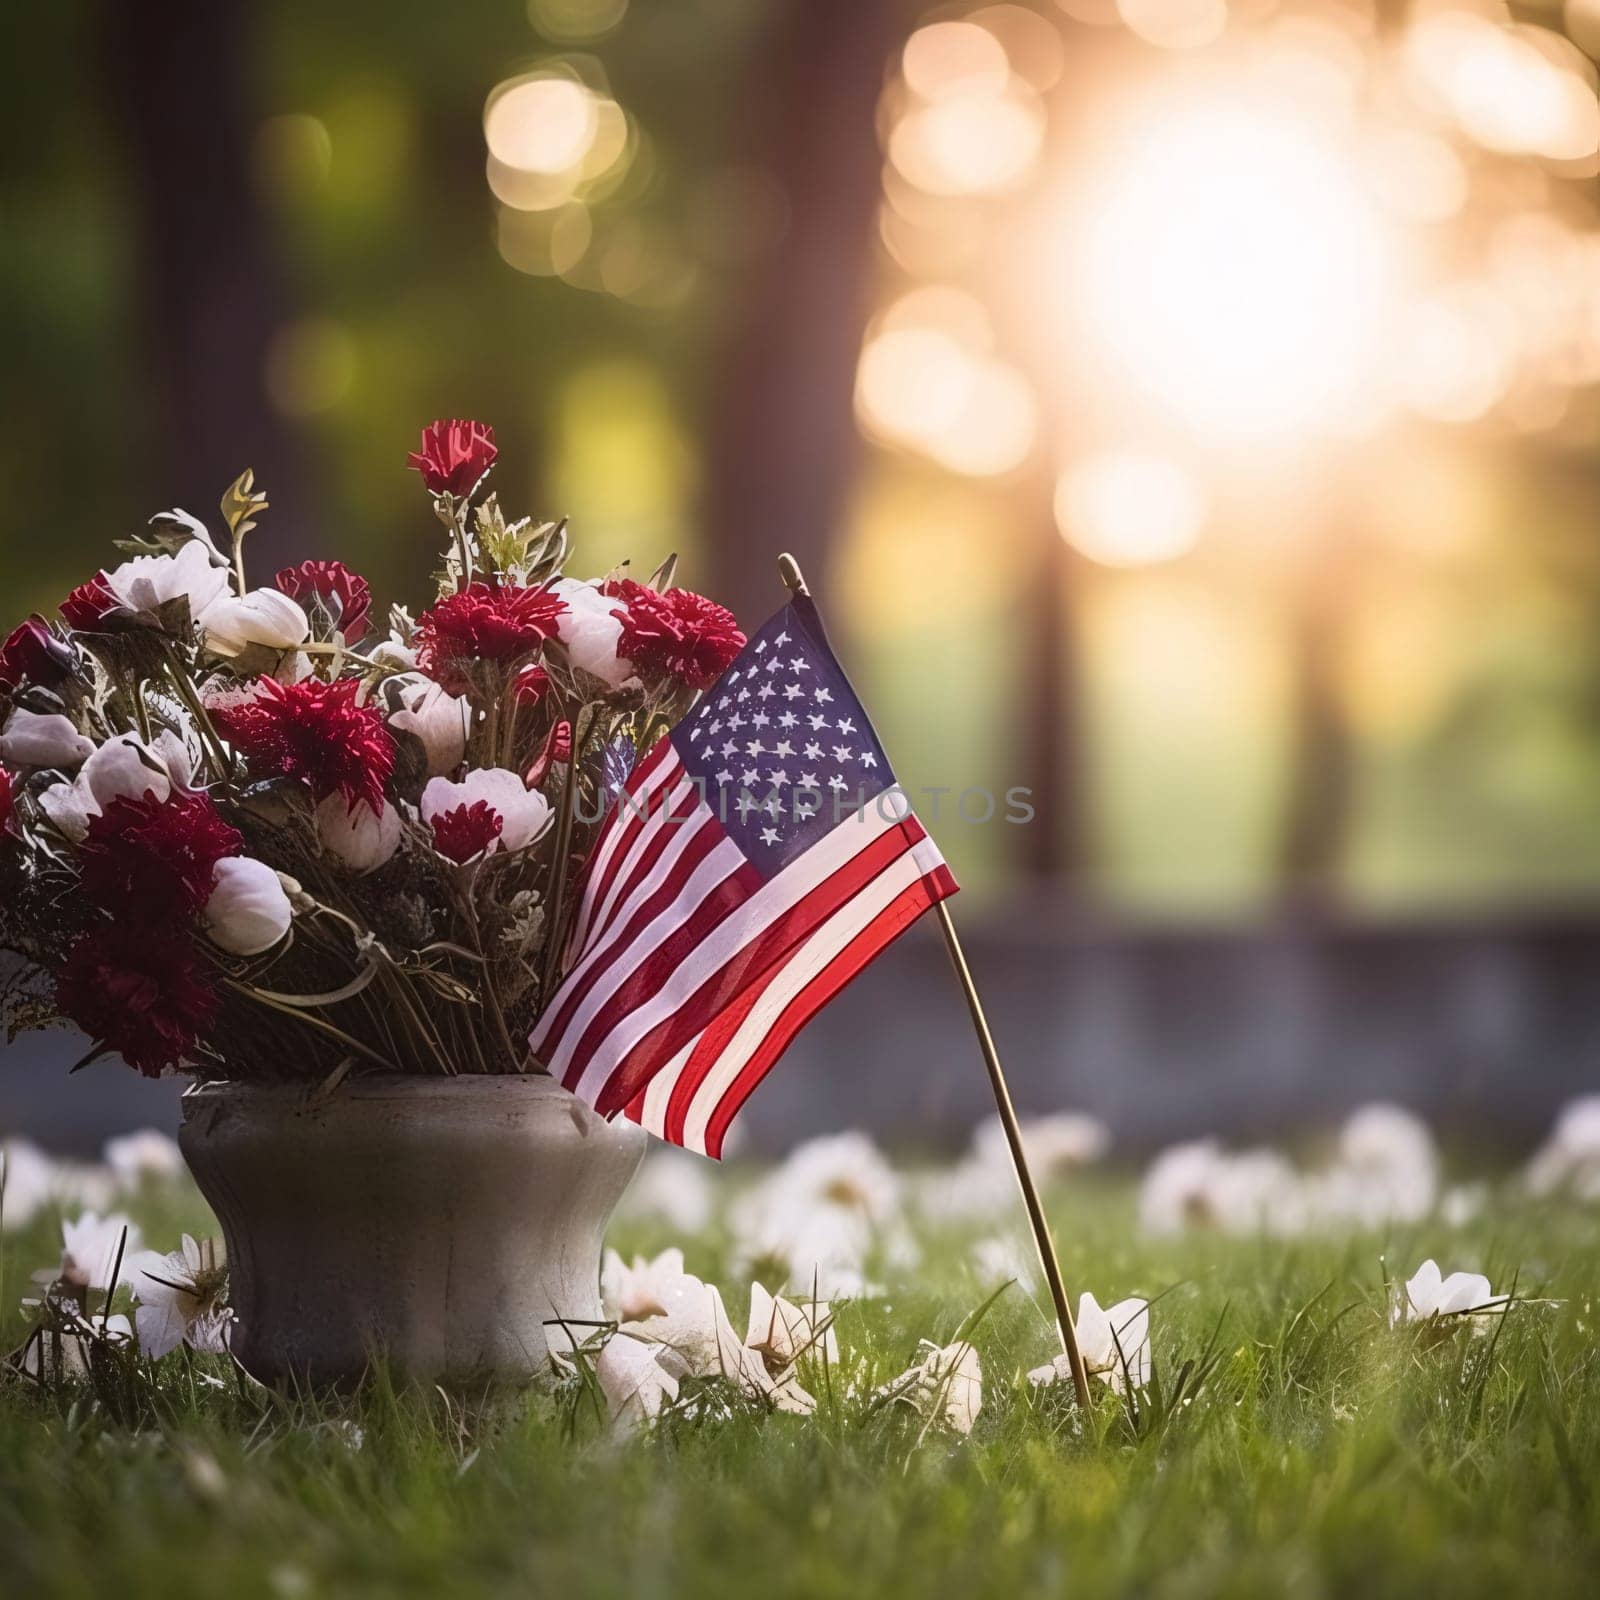 Memorial Day: American flag and flowers in a vase on the grass at sunset